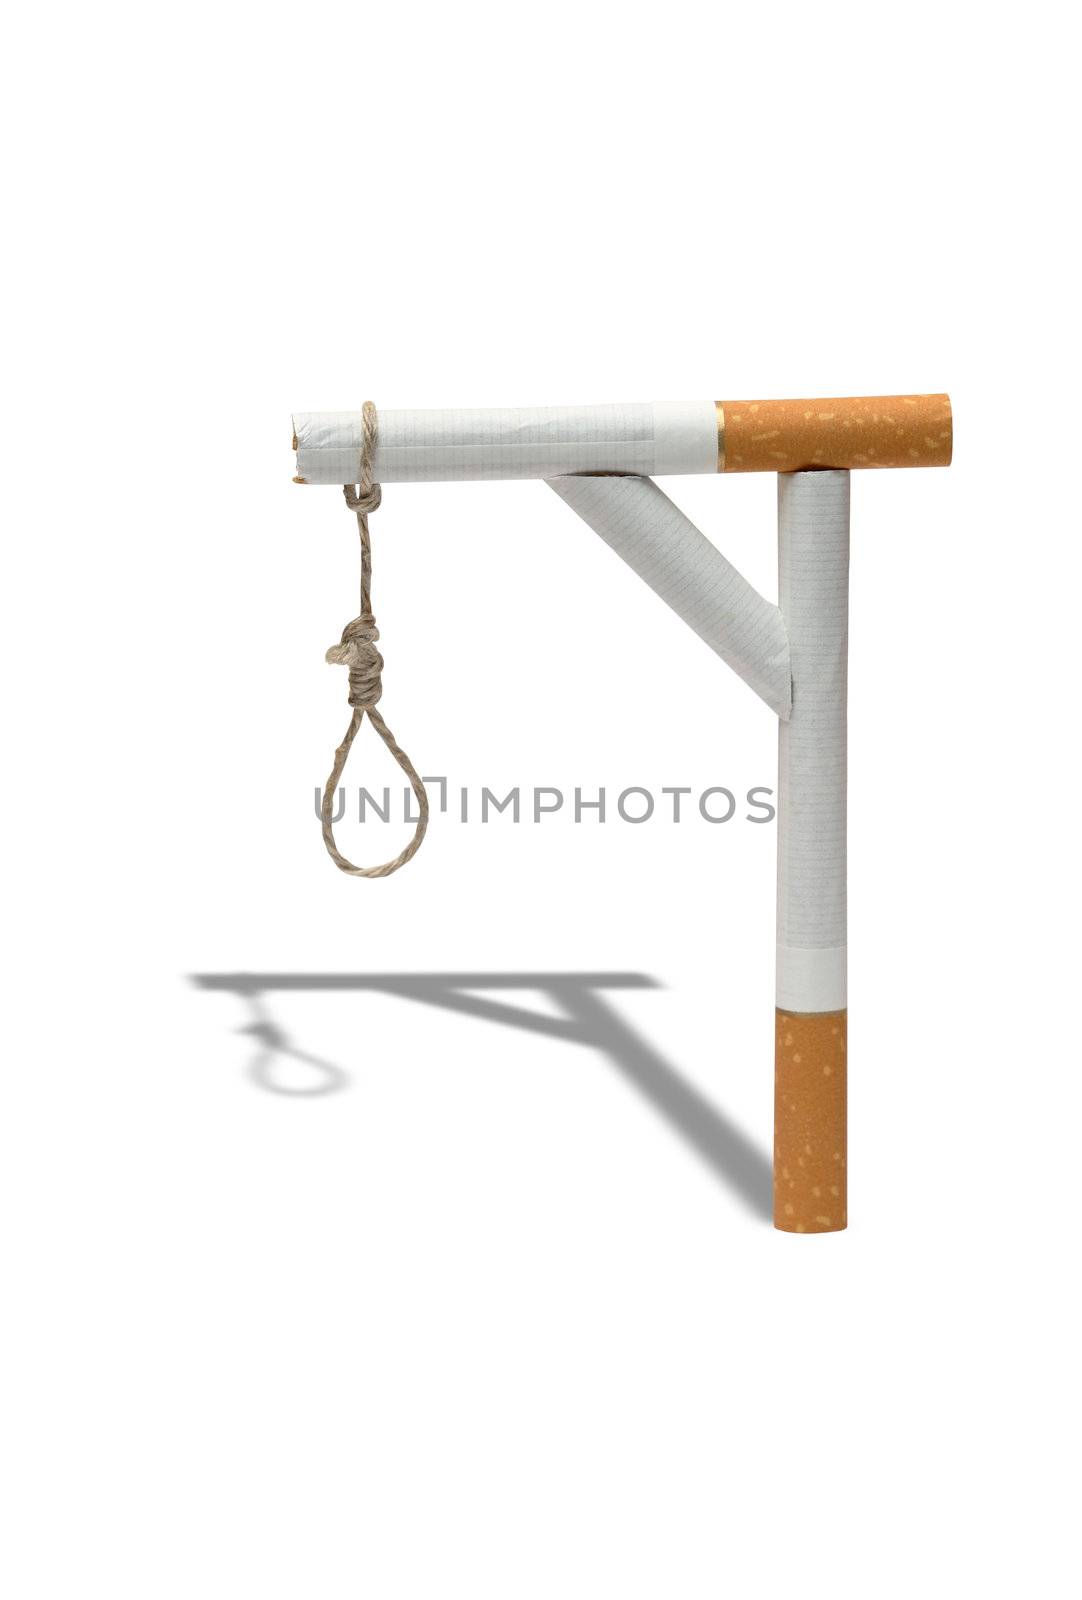 Gibbet made from cigarettes and rope on white background. Clipping path is included